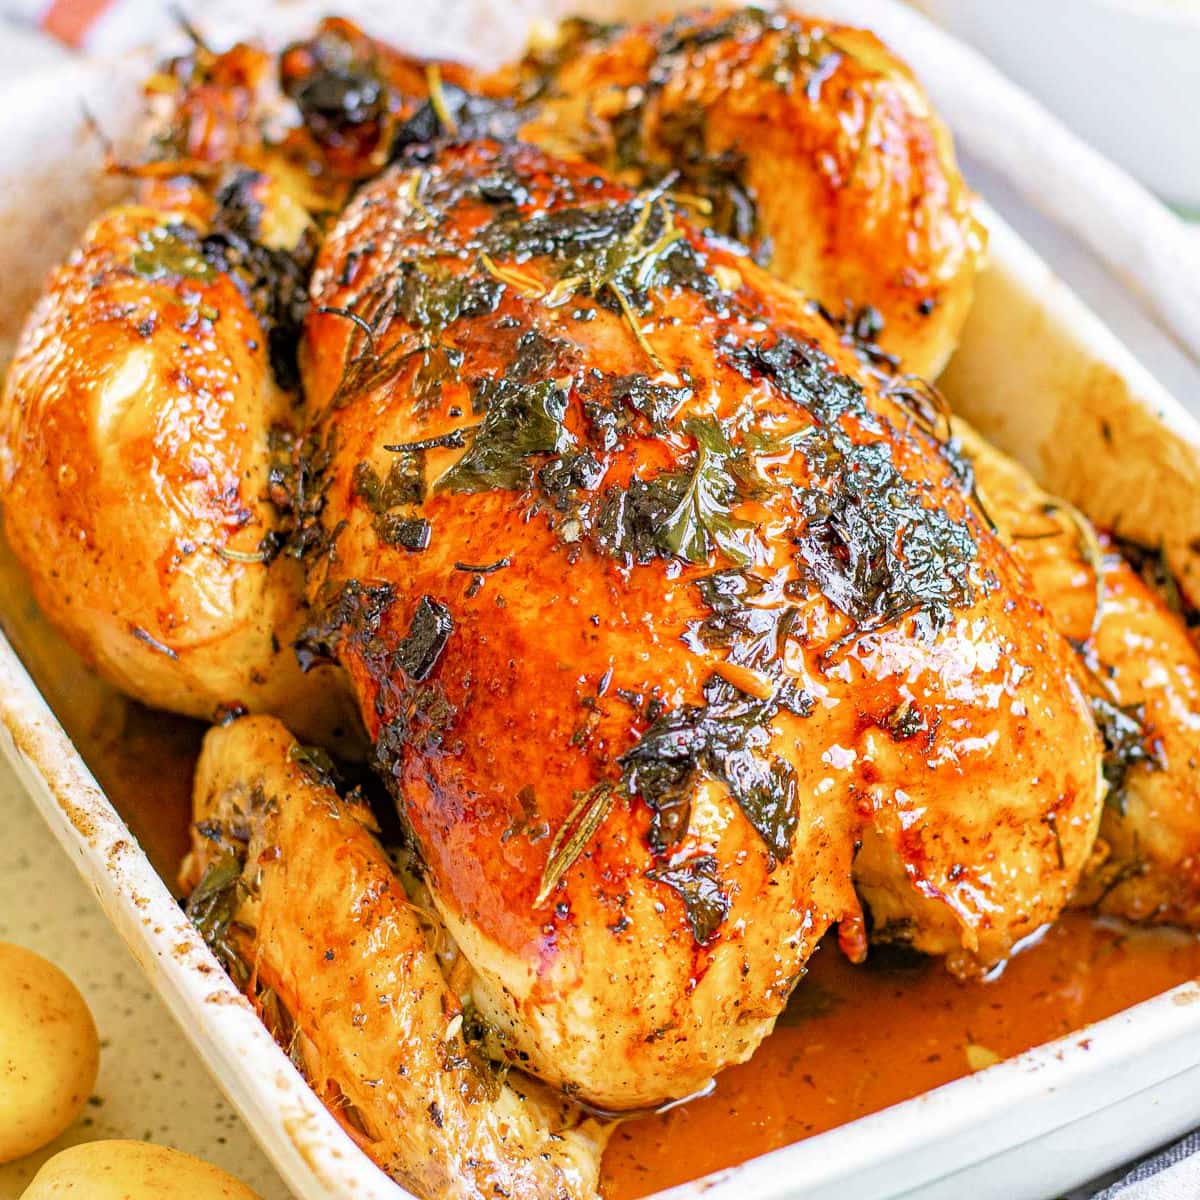 Roasted Chicken Recipe with Garlic Herb Butter – Whole Roasted